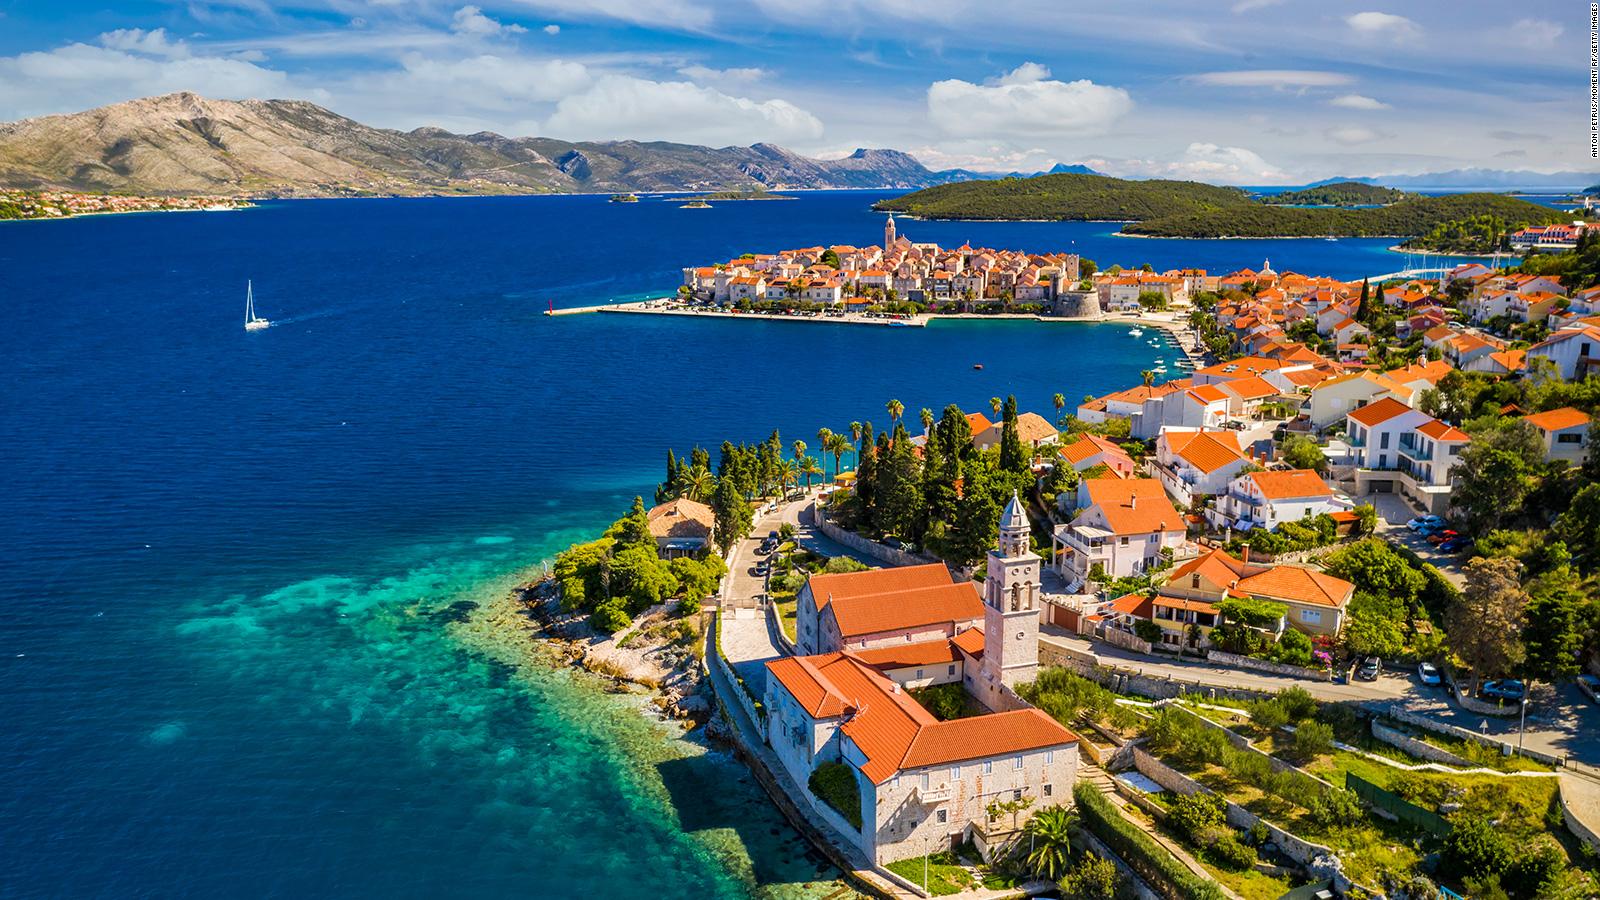 Croatia changes its currency and joins the Eurozone on a historic day